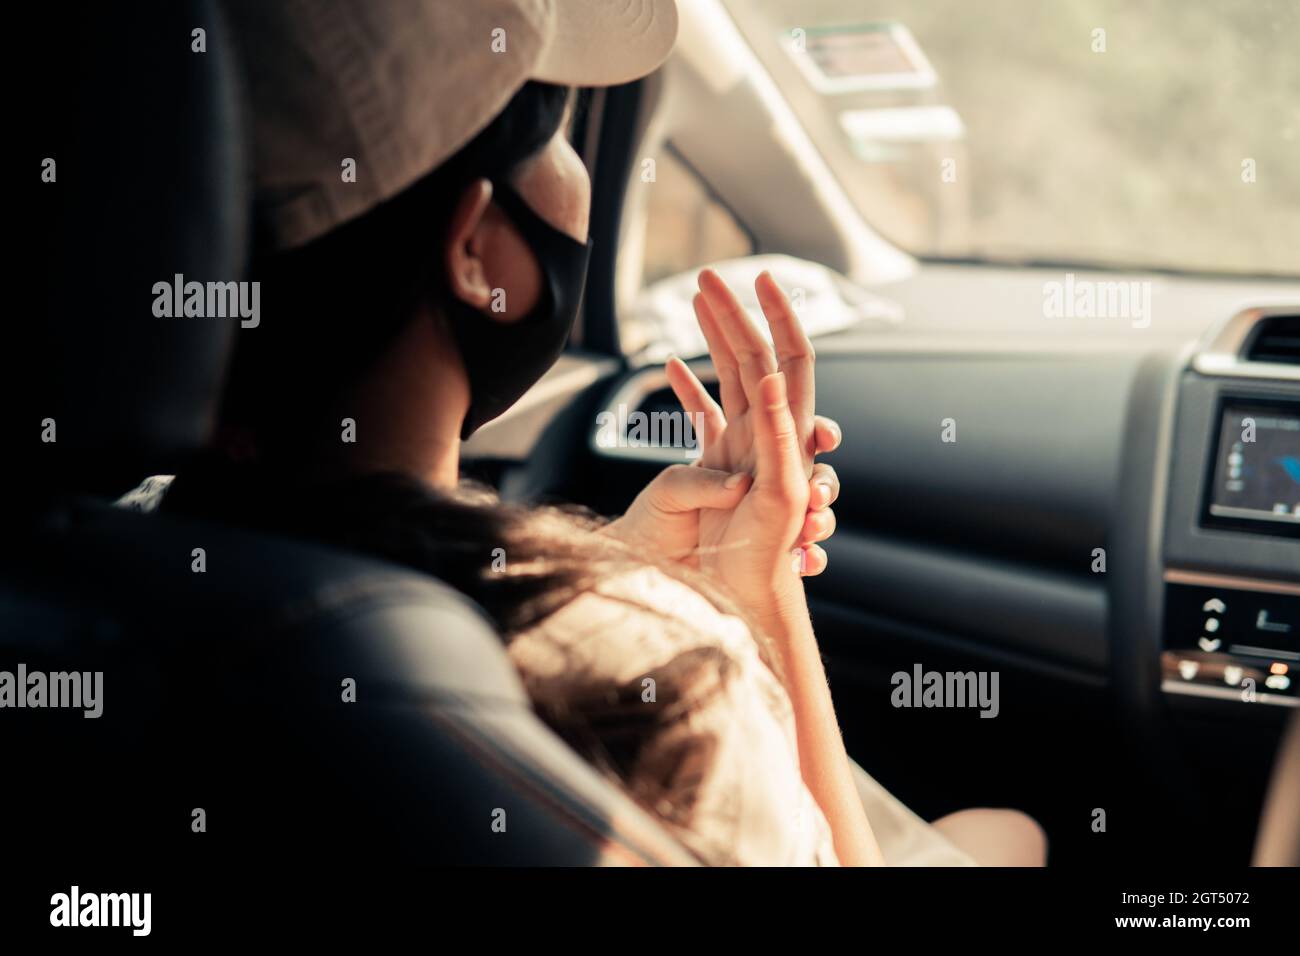 Rear View Of Woman Sitting In Car Stock Photo